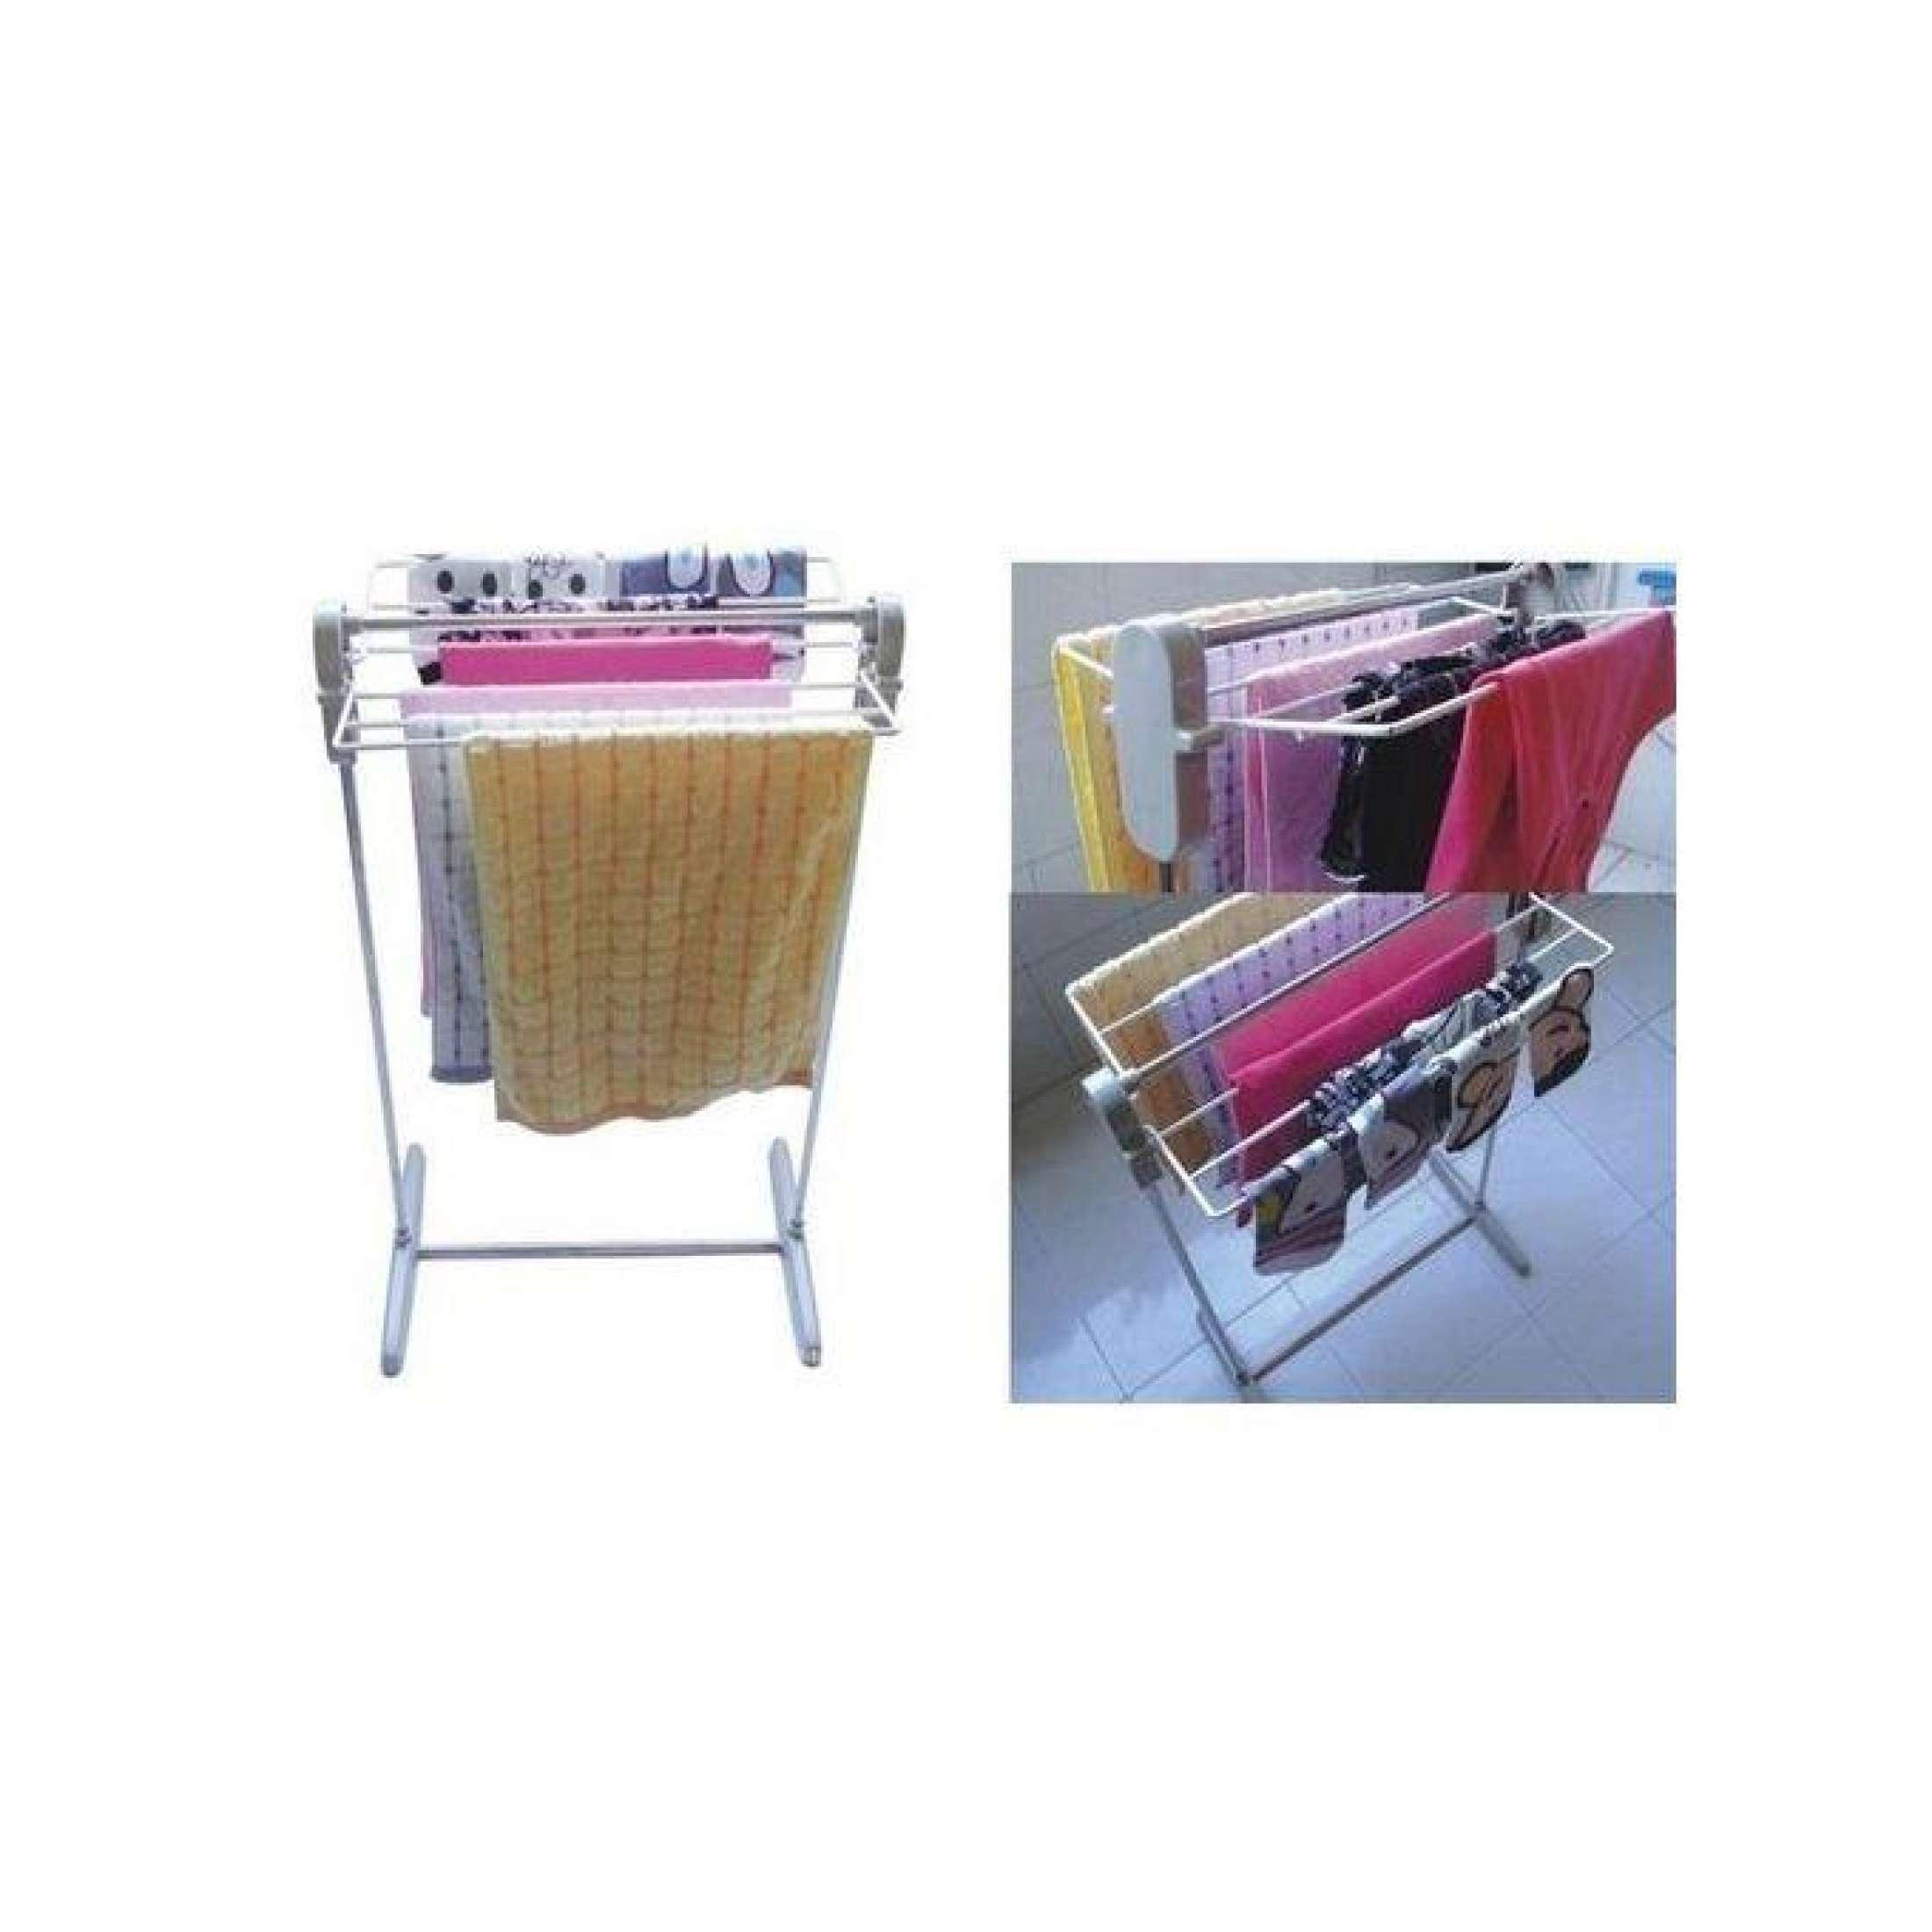 Multifunctional Clothes Rack In Pakistan